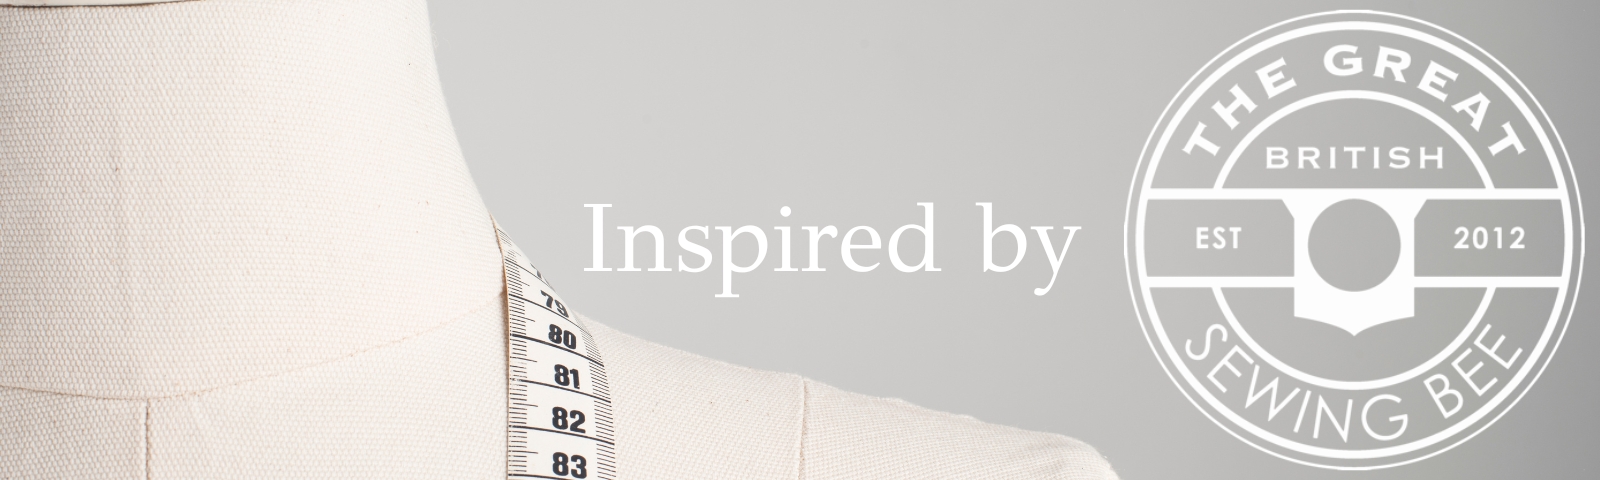 Inspires_By_The Sewing_Bee_Category_Banner